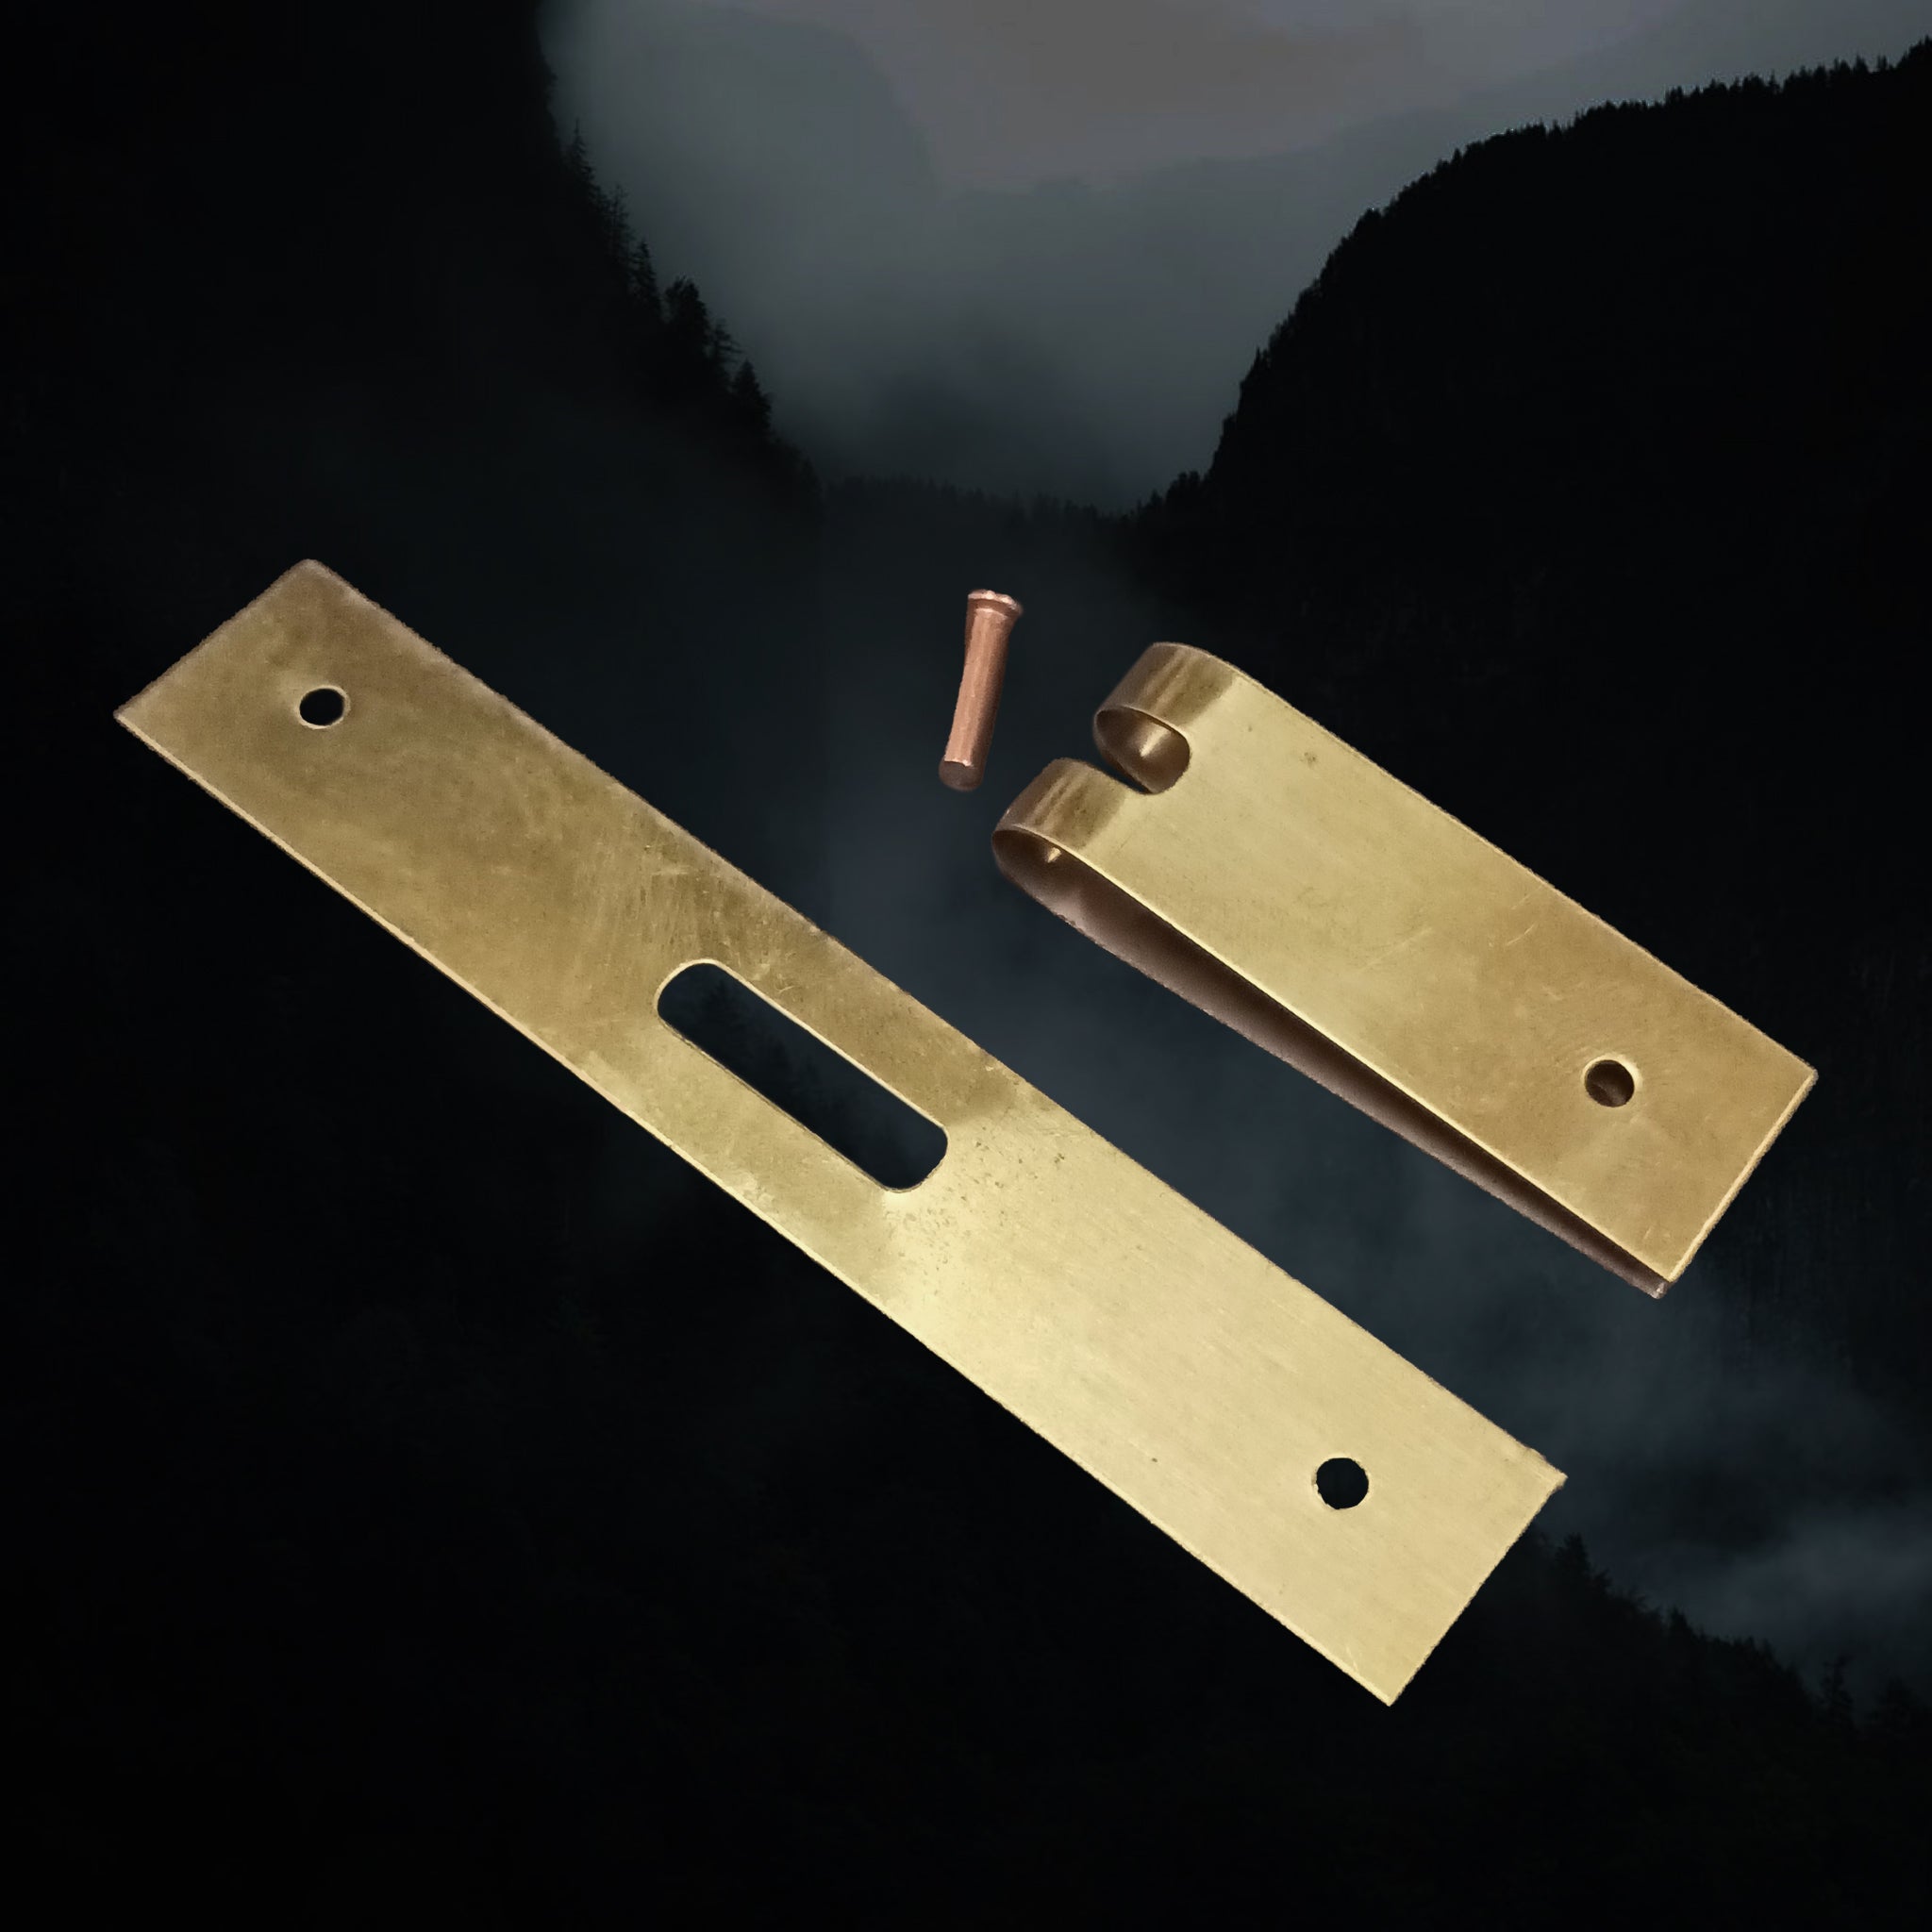 19mm (0.75 inch) Wide Brass Buckle Plate - Flat and Folded with Copper Rivet